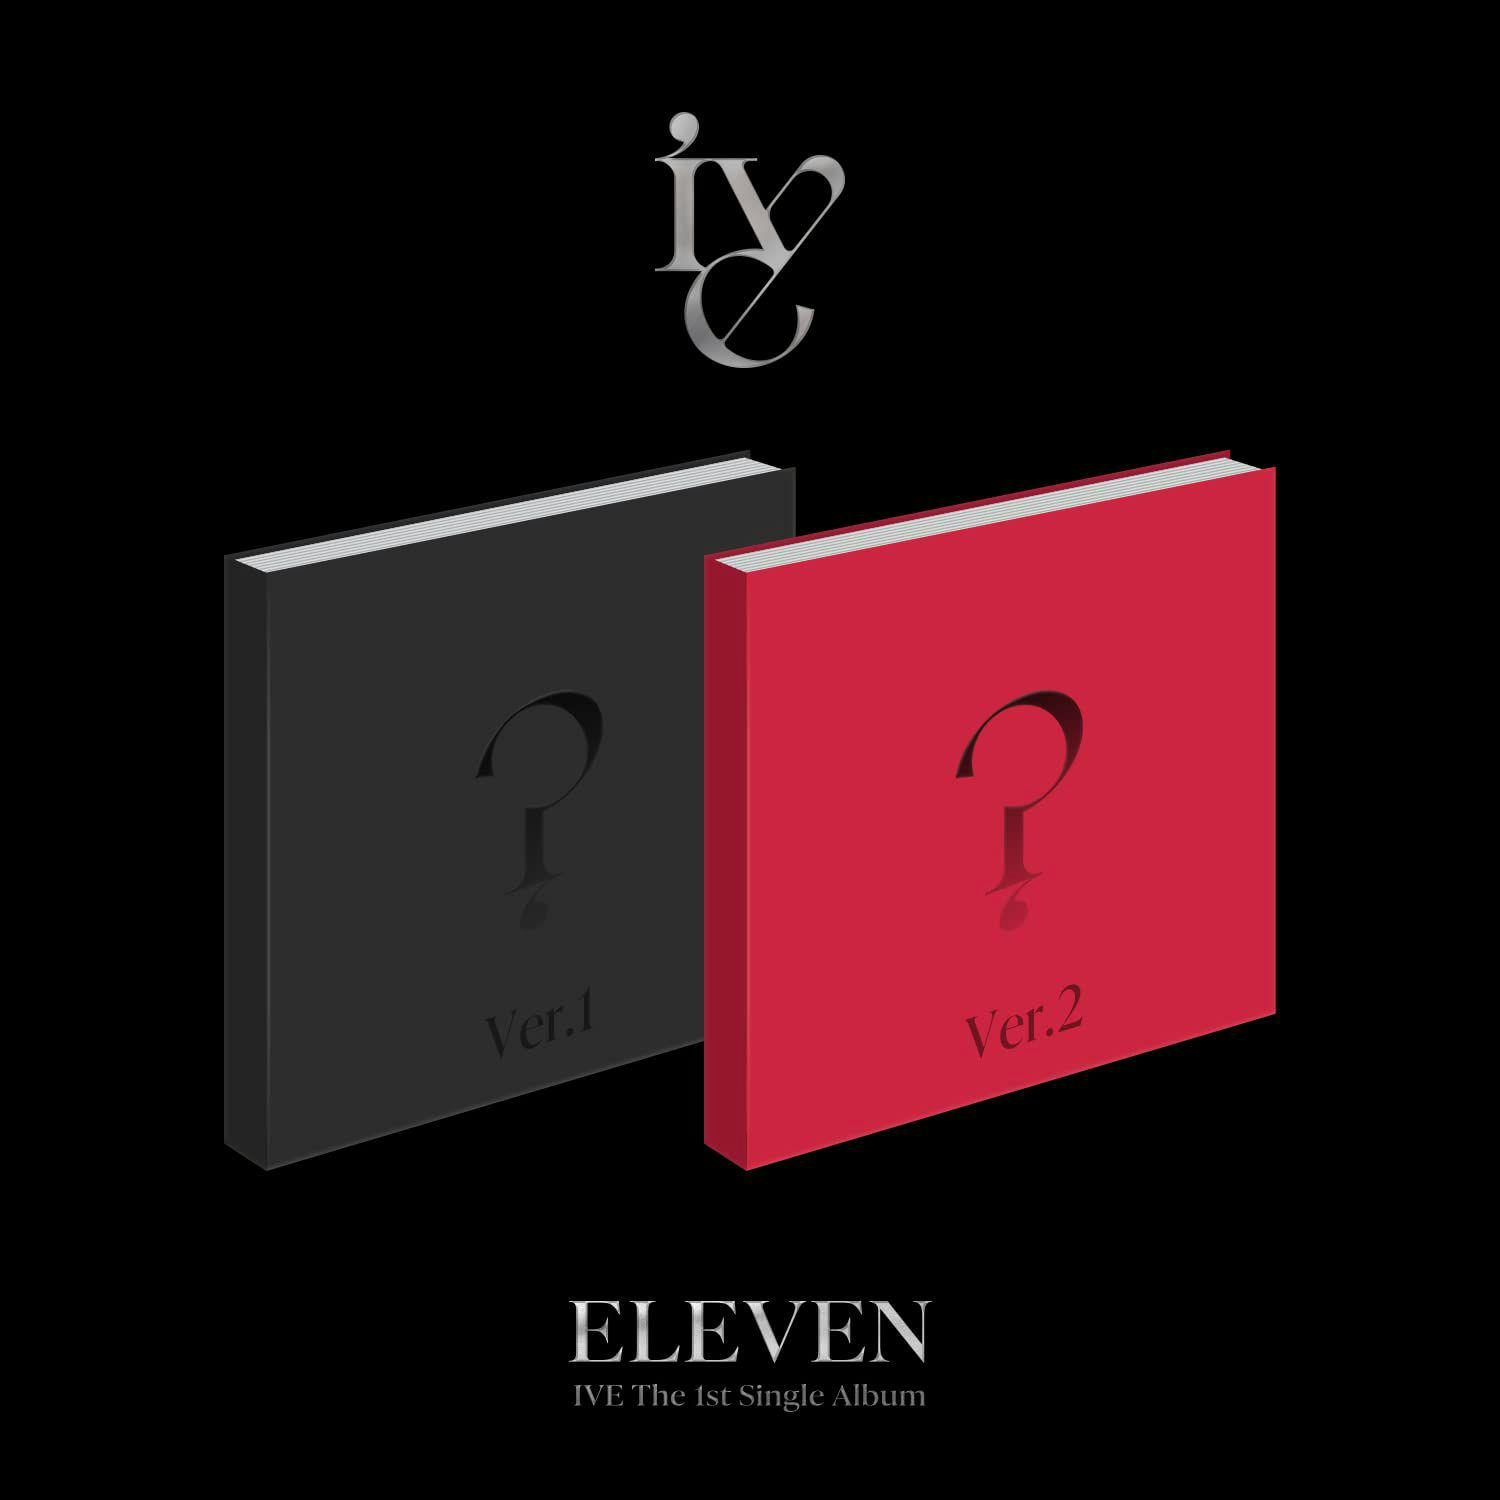 ive eleven: japanese version - e edition cd $17.49$15.49